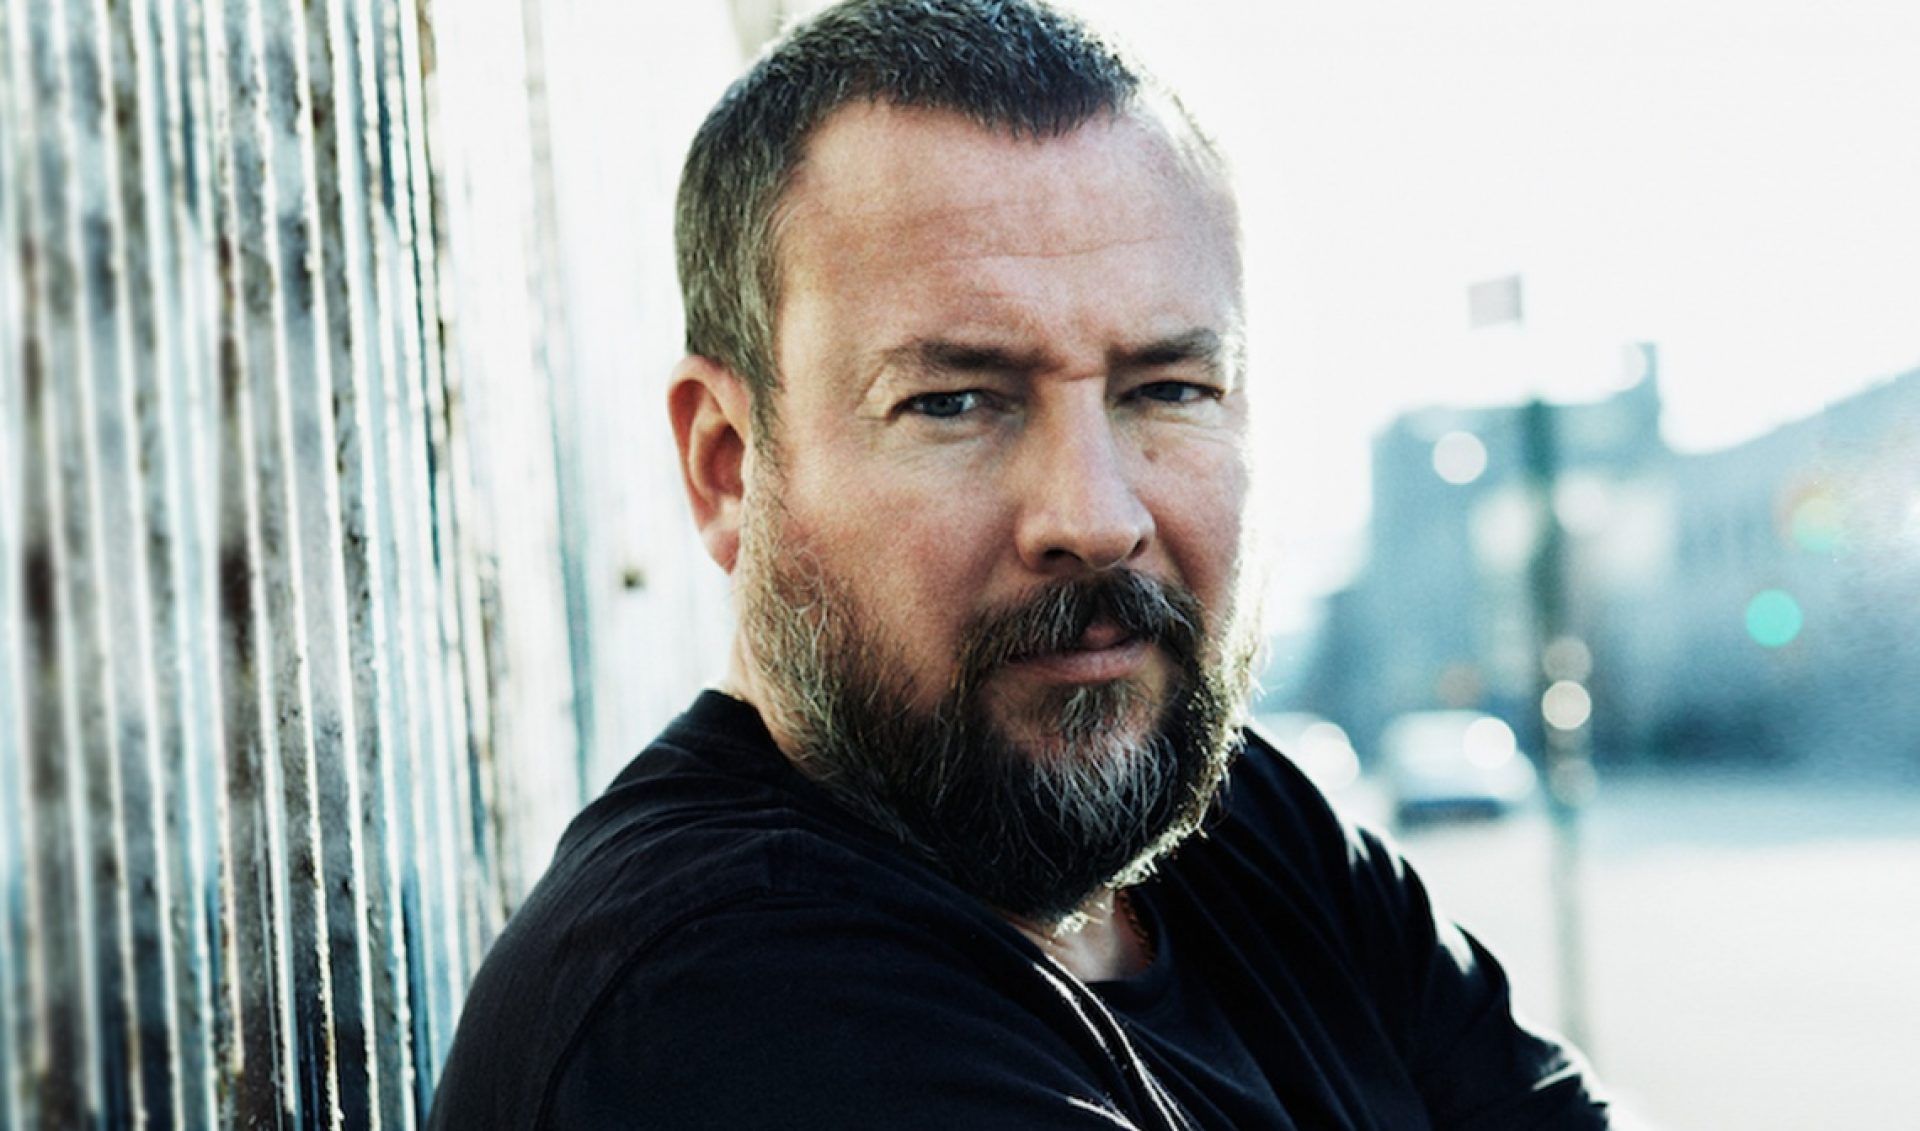 Vice CEO Shane Smith To Be Replaced By Former A&E Chief Nancy Dubuc (Report)